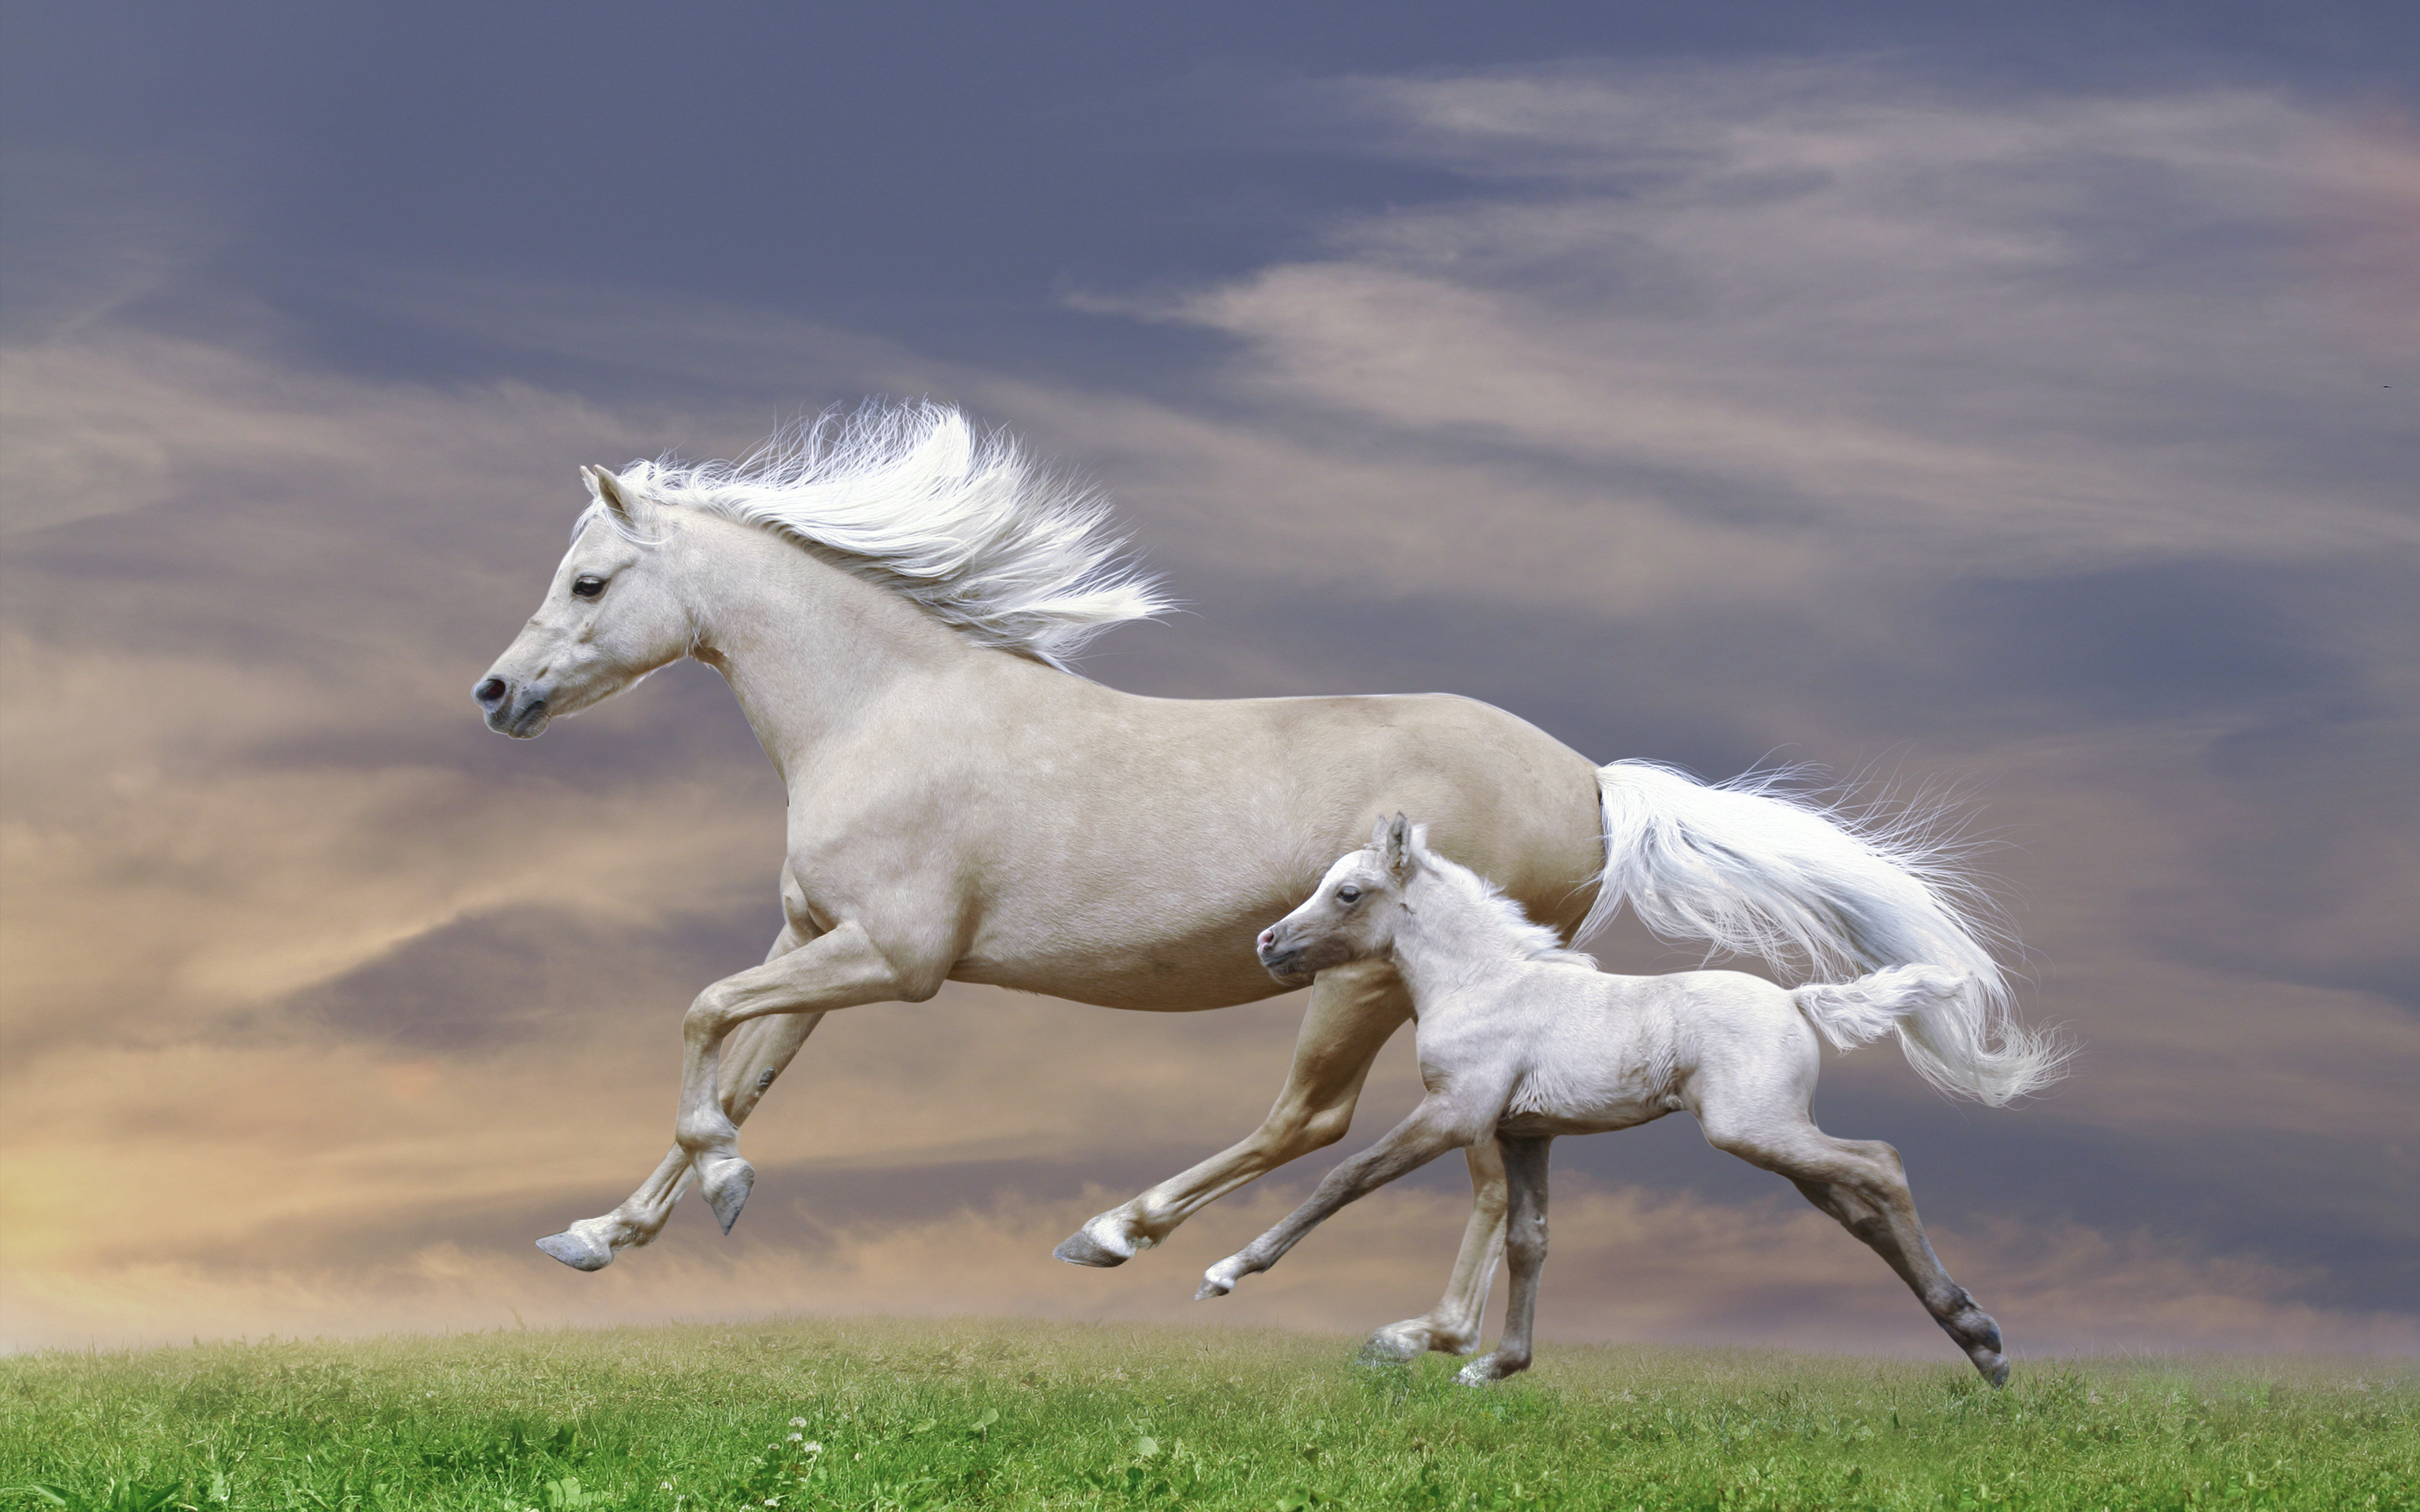 White Mare And Foal Galloping Sunset Hd Wallpaper : Wallpapers13.com